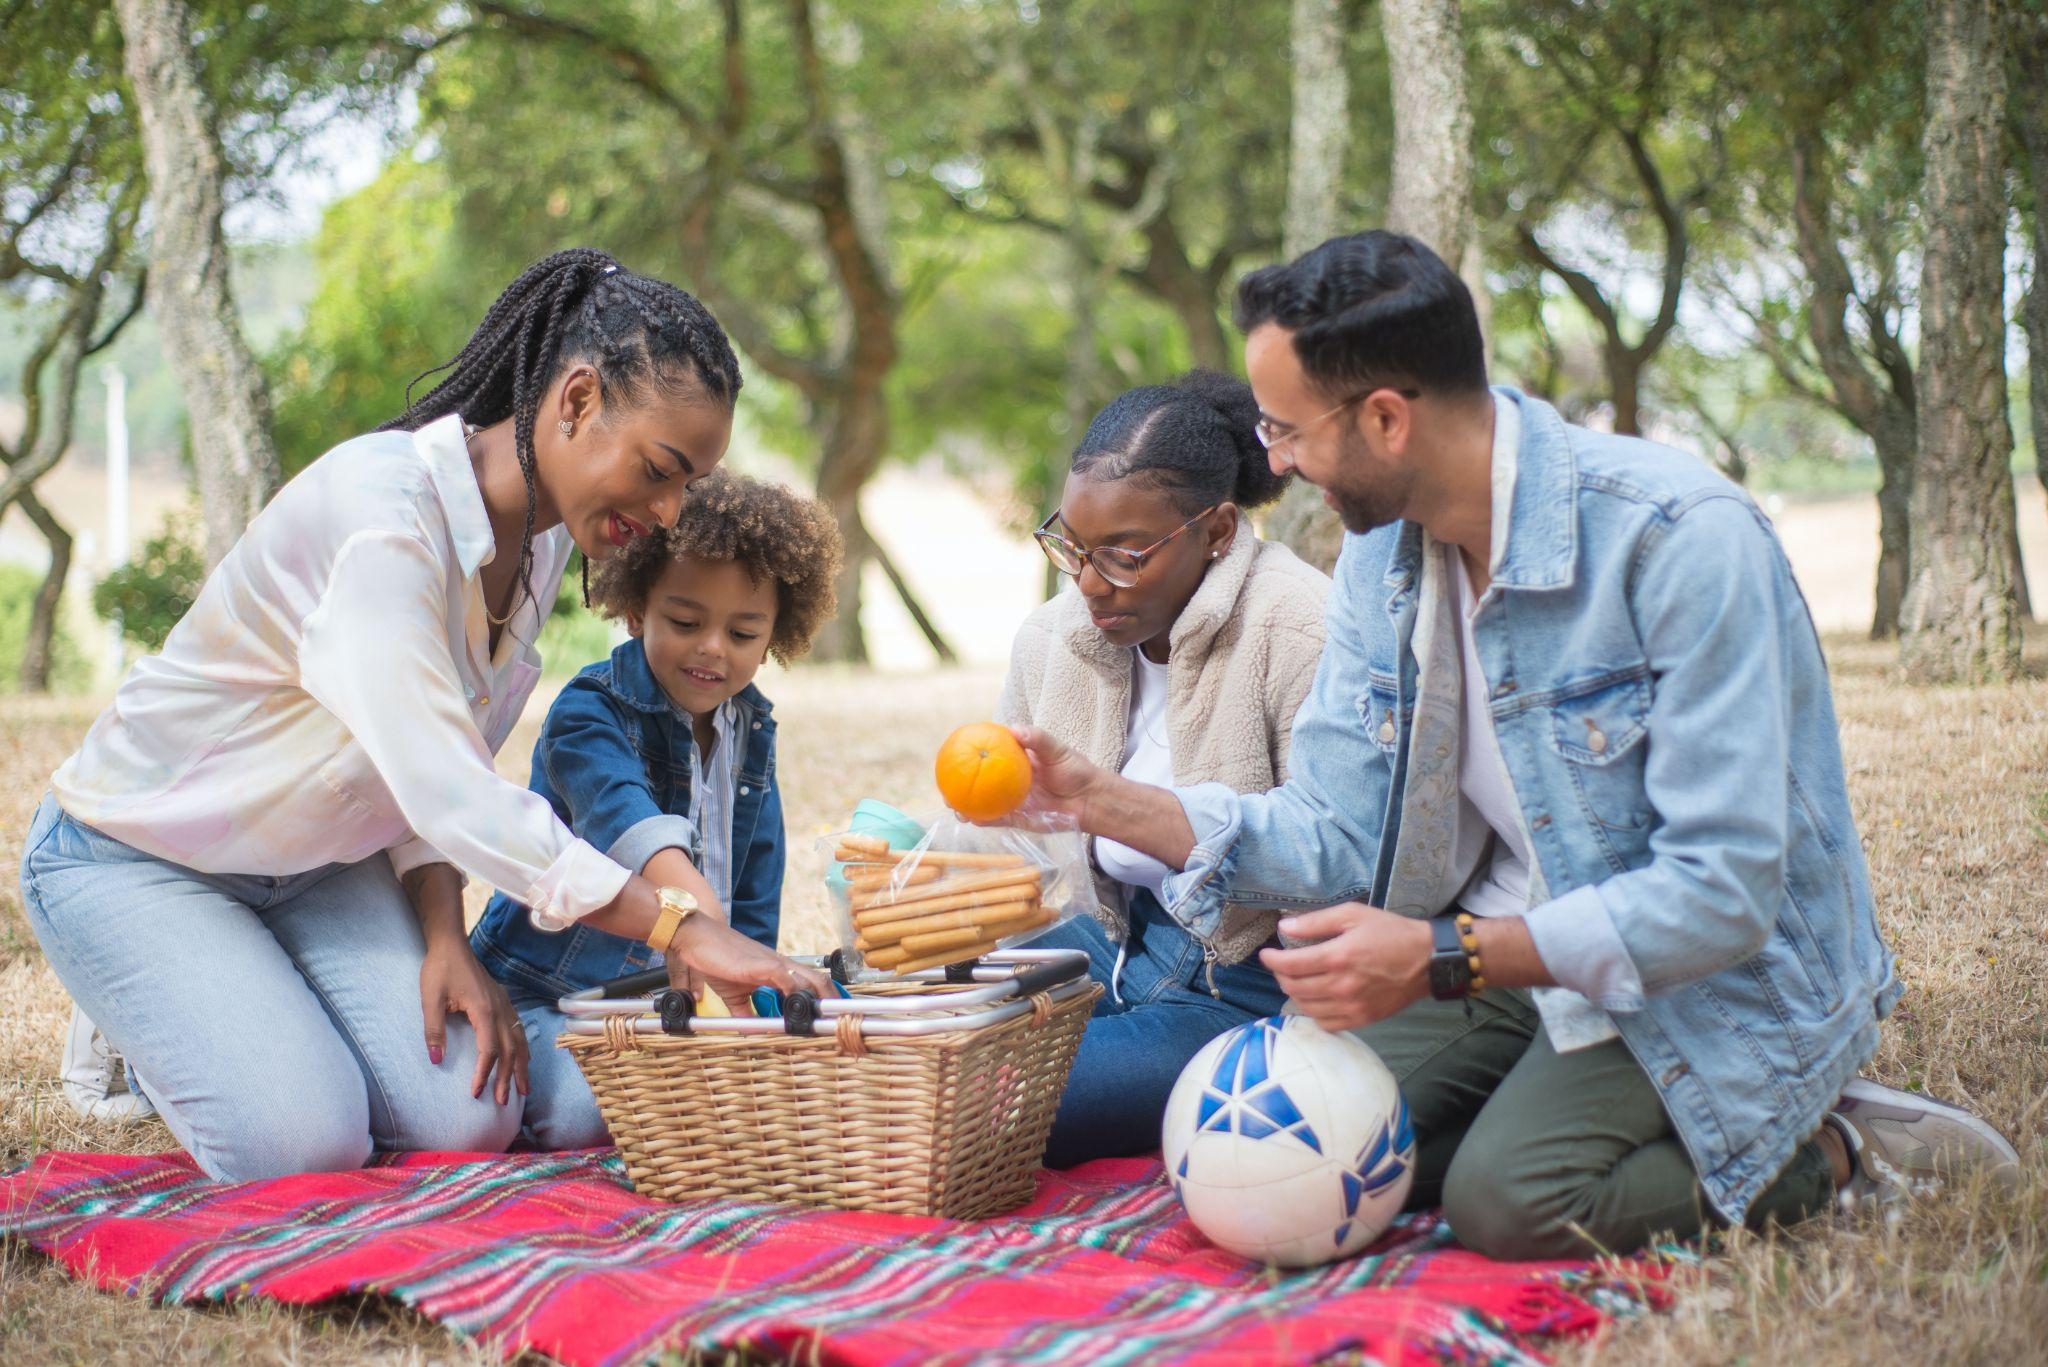 Mixed-race family sitting down on a blanket with a picnic basket in front of trees.